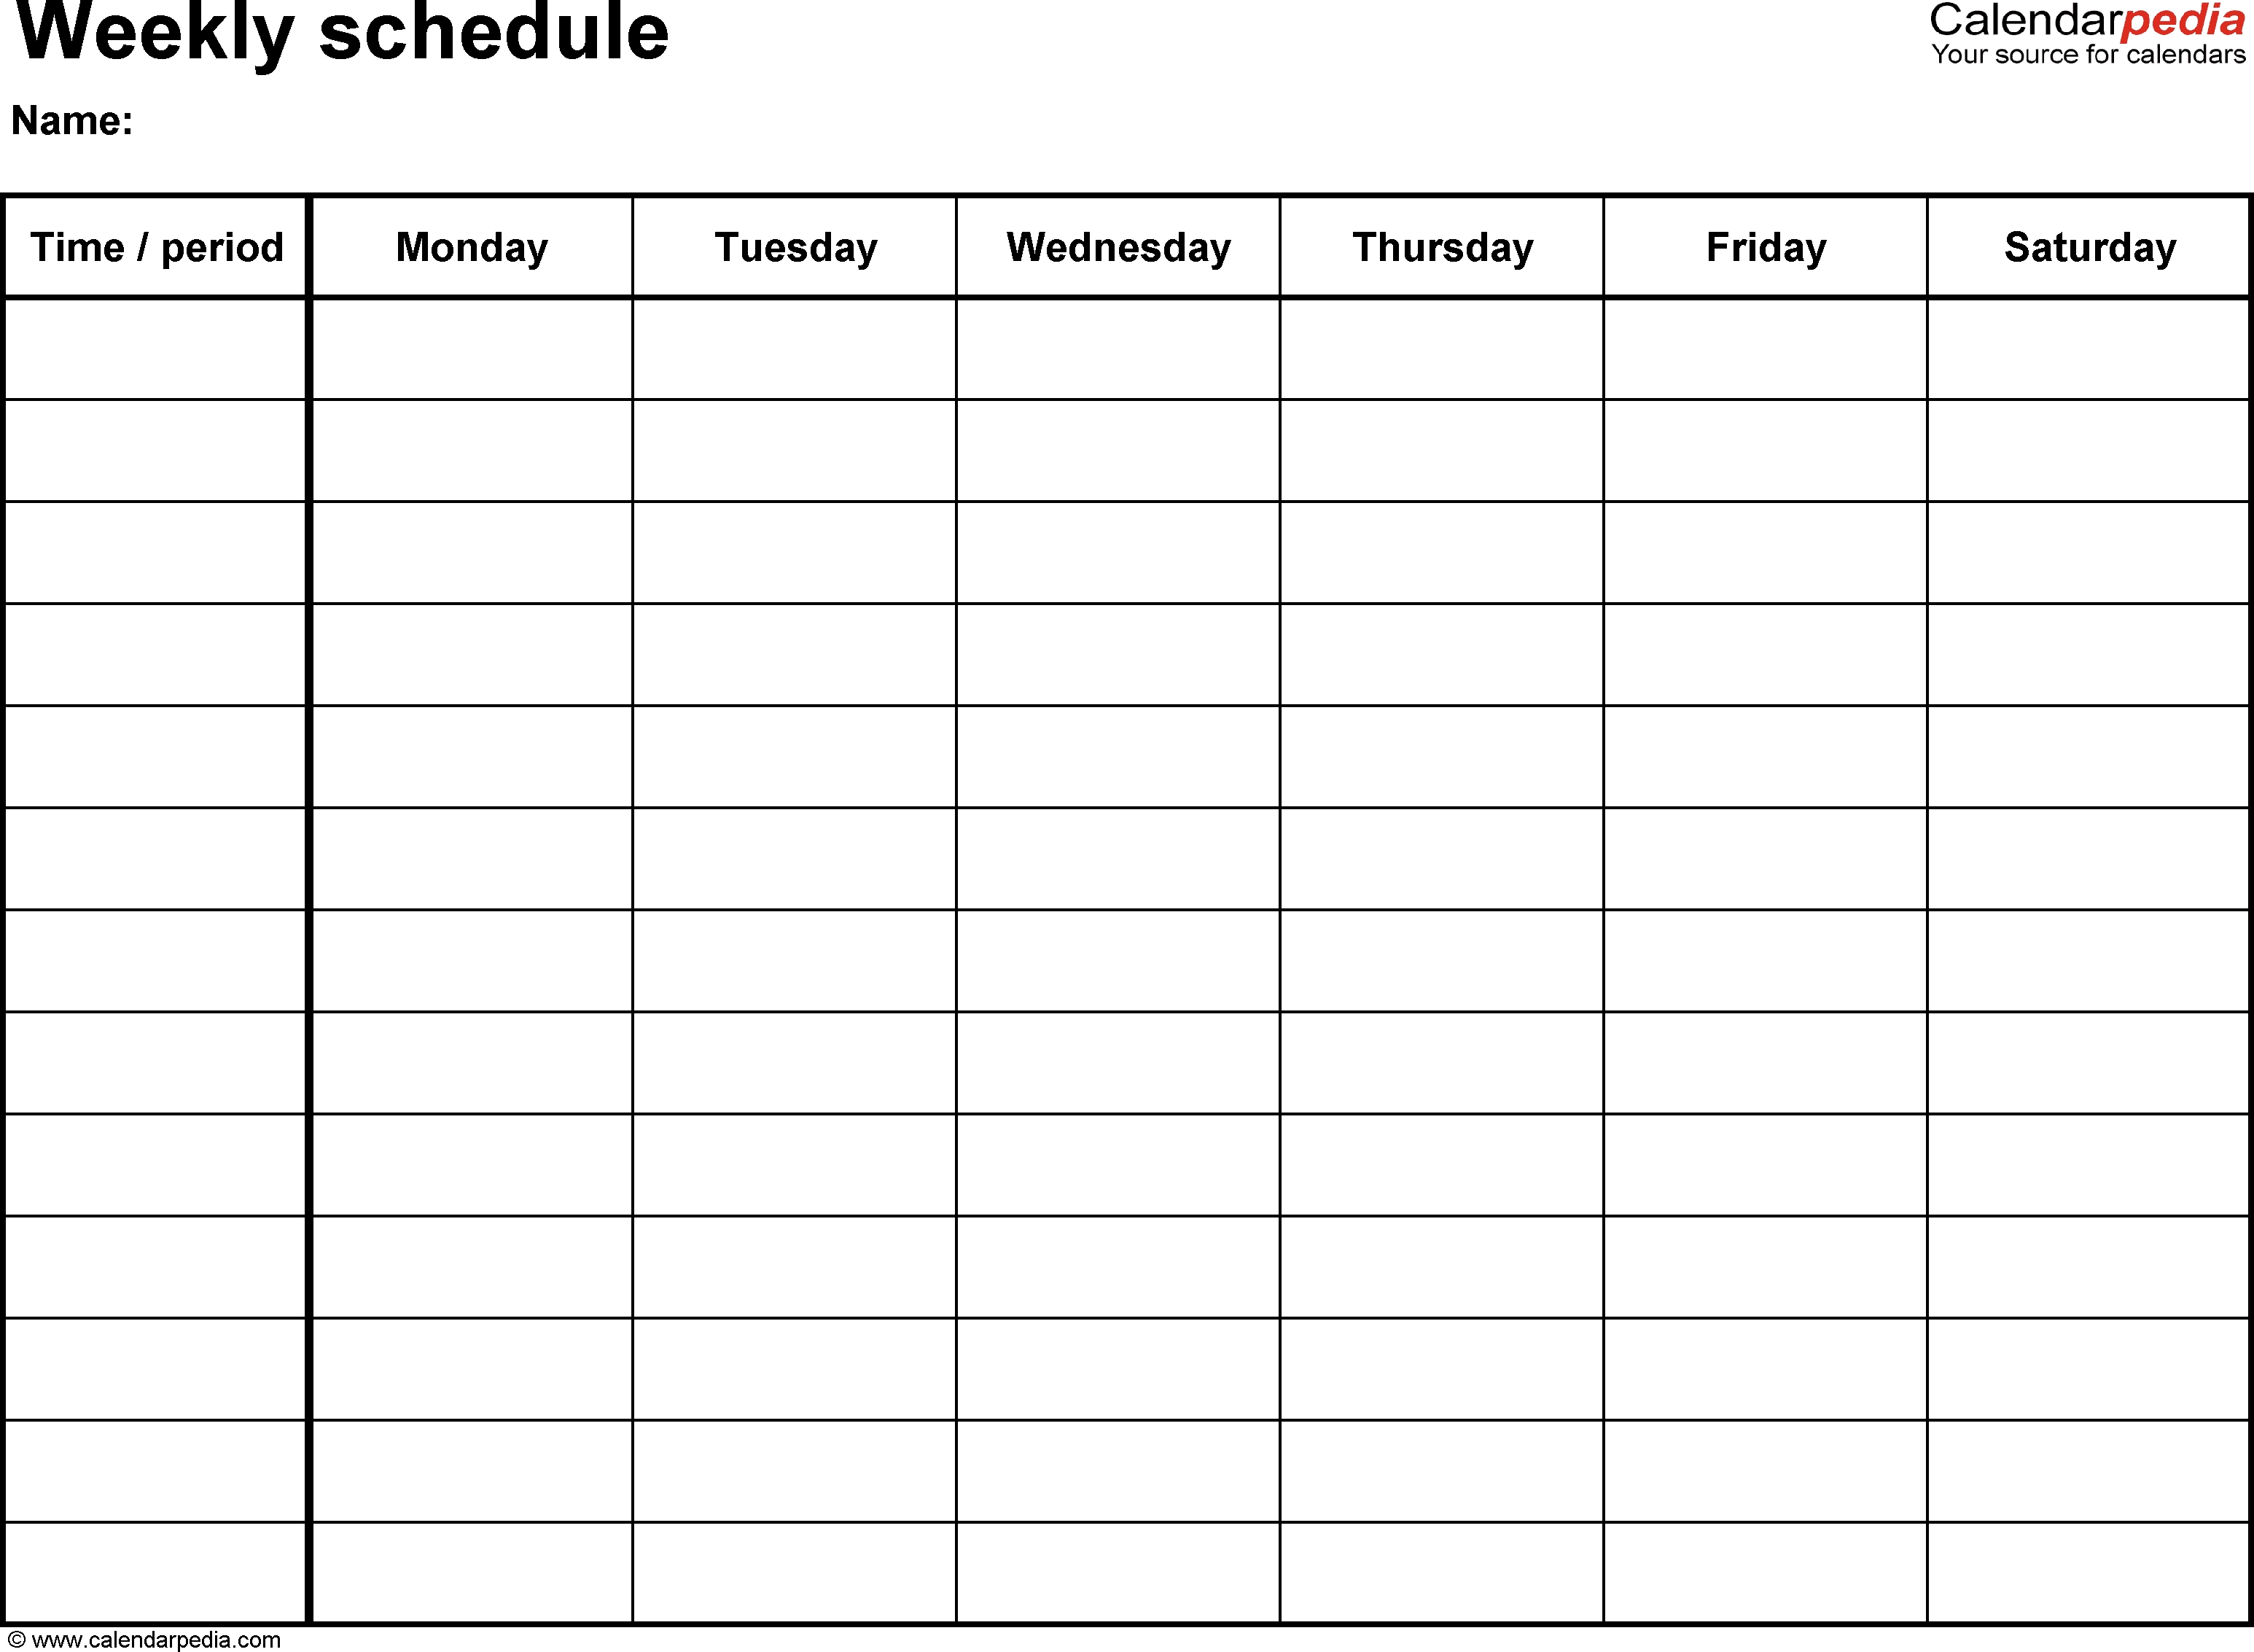 Free Weekly Schedule Templates For Excel - 18 Templates intended for Kid Days Of The Week Calendar Template